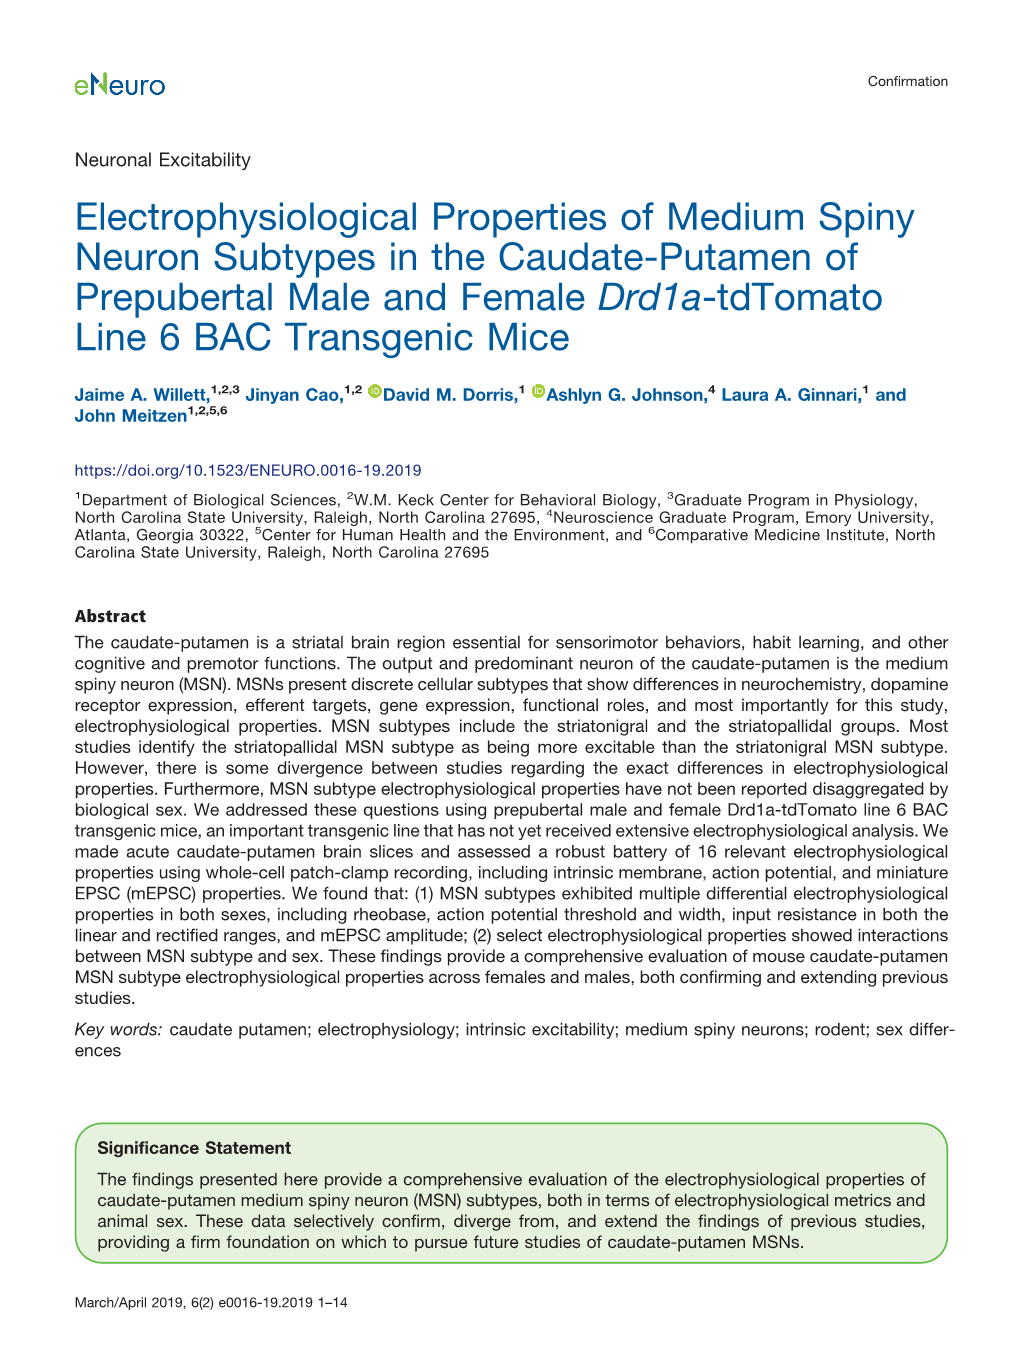 Electrophysiological Properties of Medium Spiny Neuron Subtypes in the Caudate-Putamen of Prepubertal Male and Female Drd1a-Tdtomato Line 6 BAC Transgenic Mice